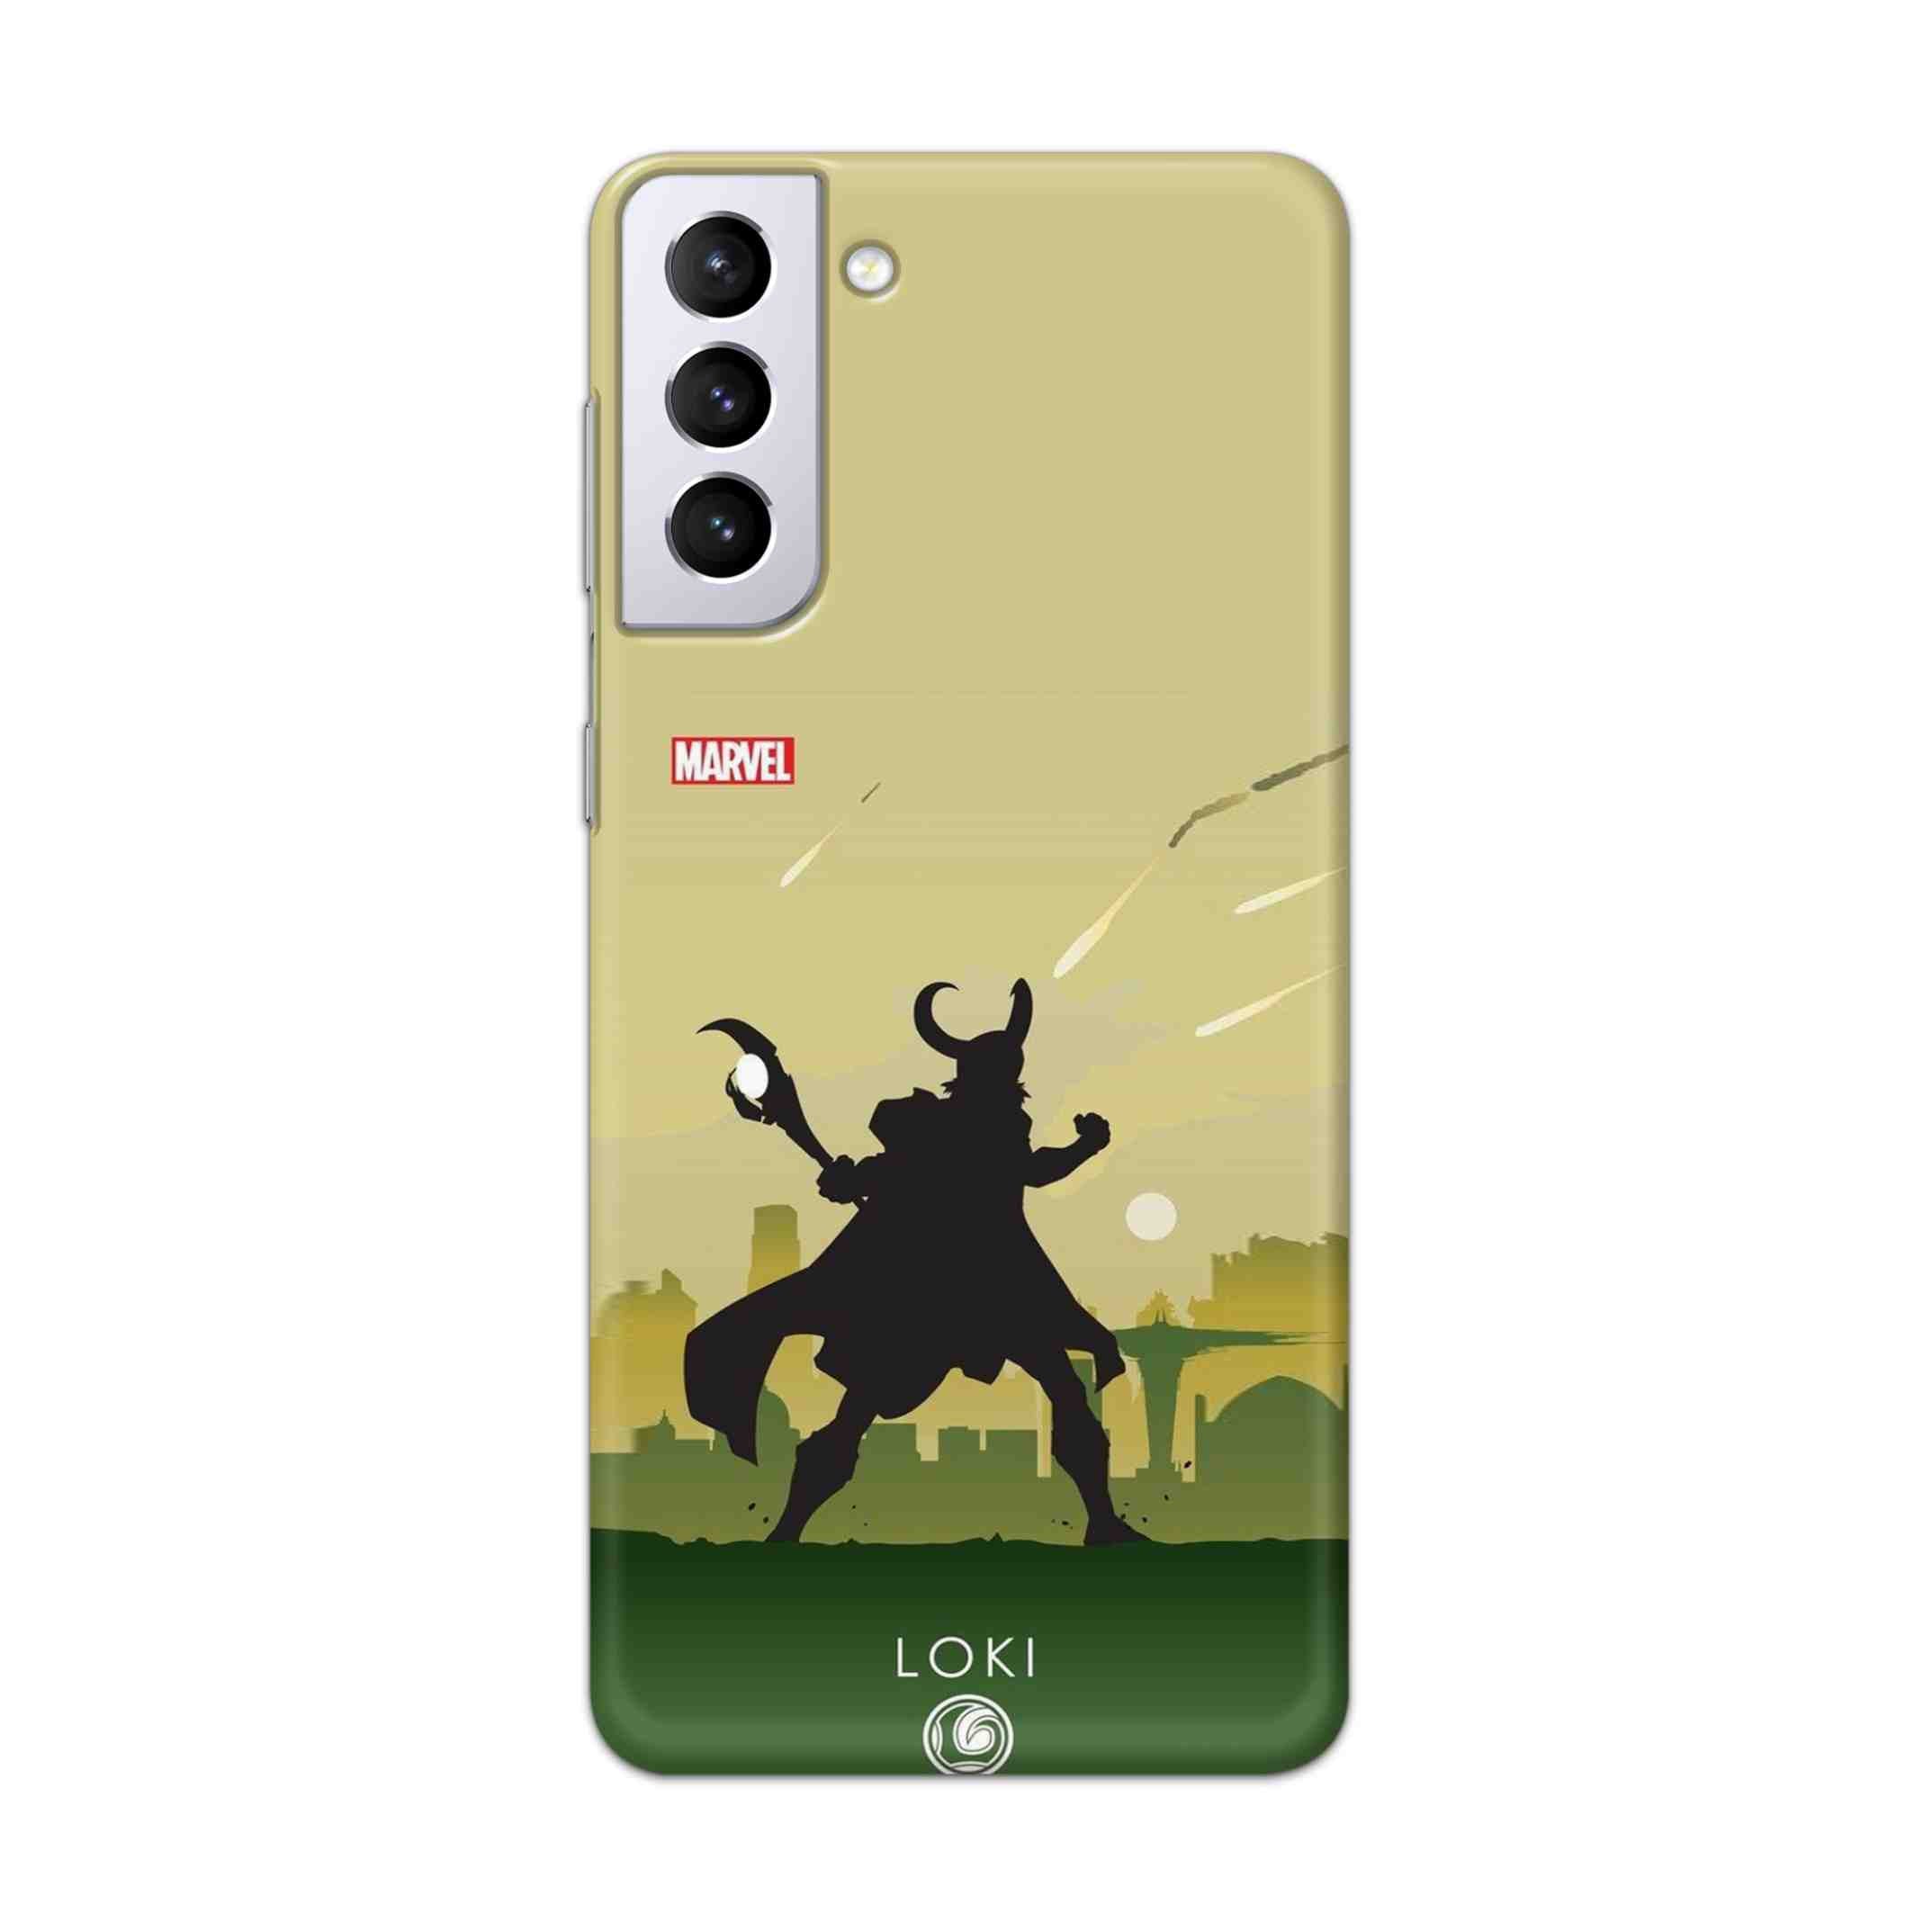 Buy Loki Hard Back Mobile Phone Case Cover For Samsung Galaxy S21 Plus Online